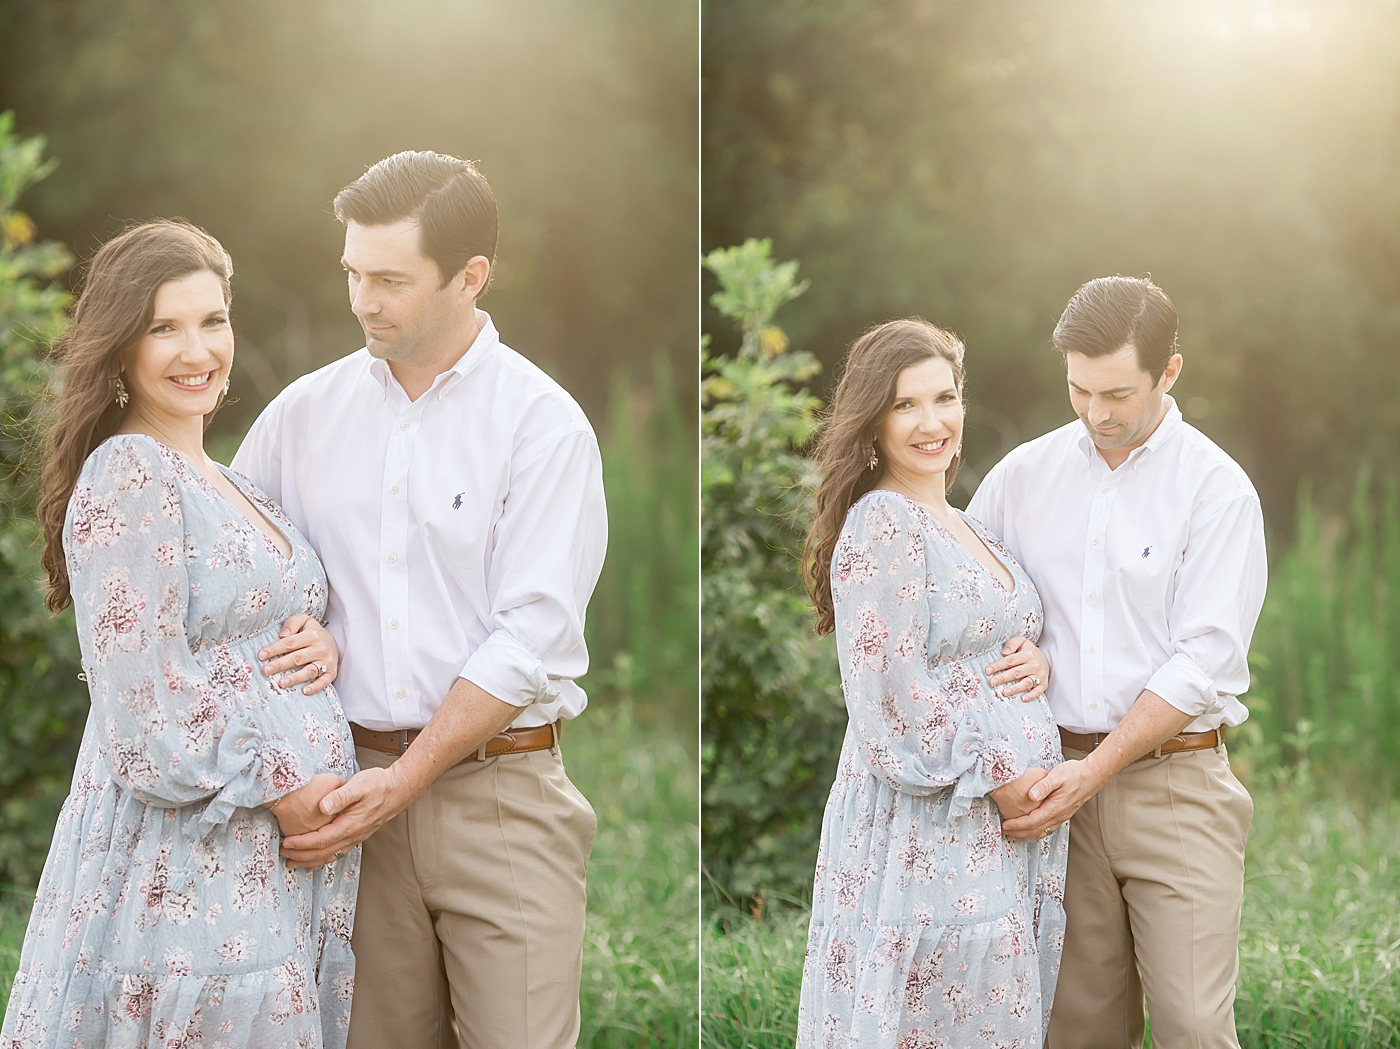 Husband looking at his wife during maternity session with Fresh Light Photography in Houston, TX.